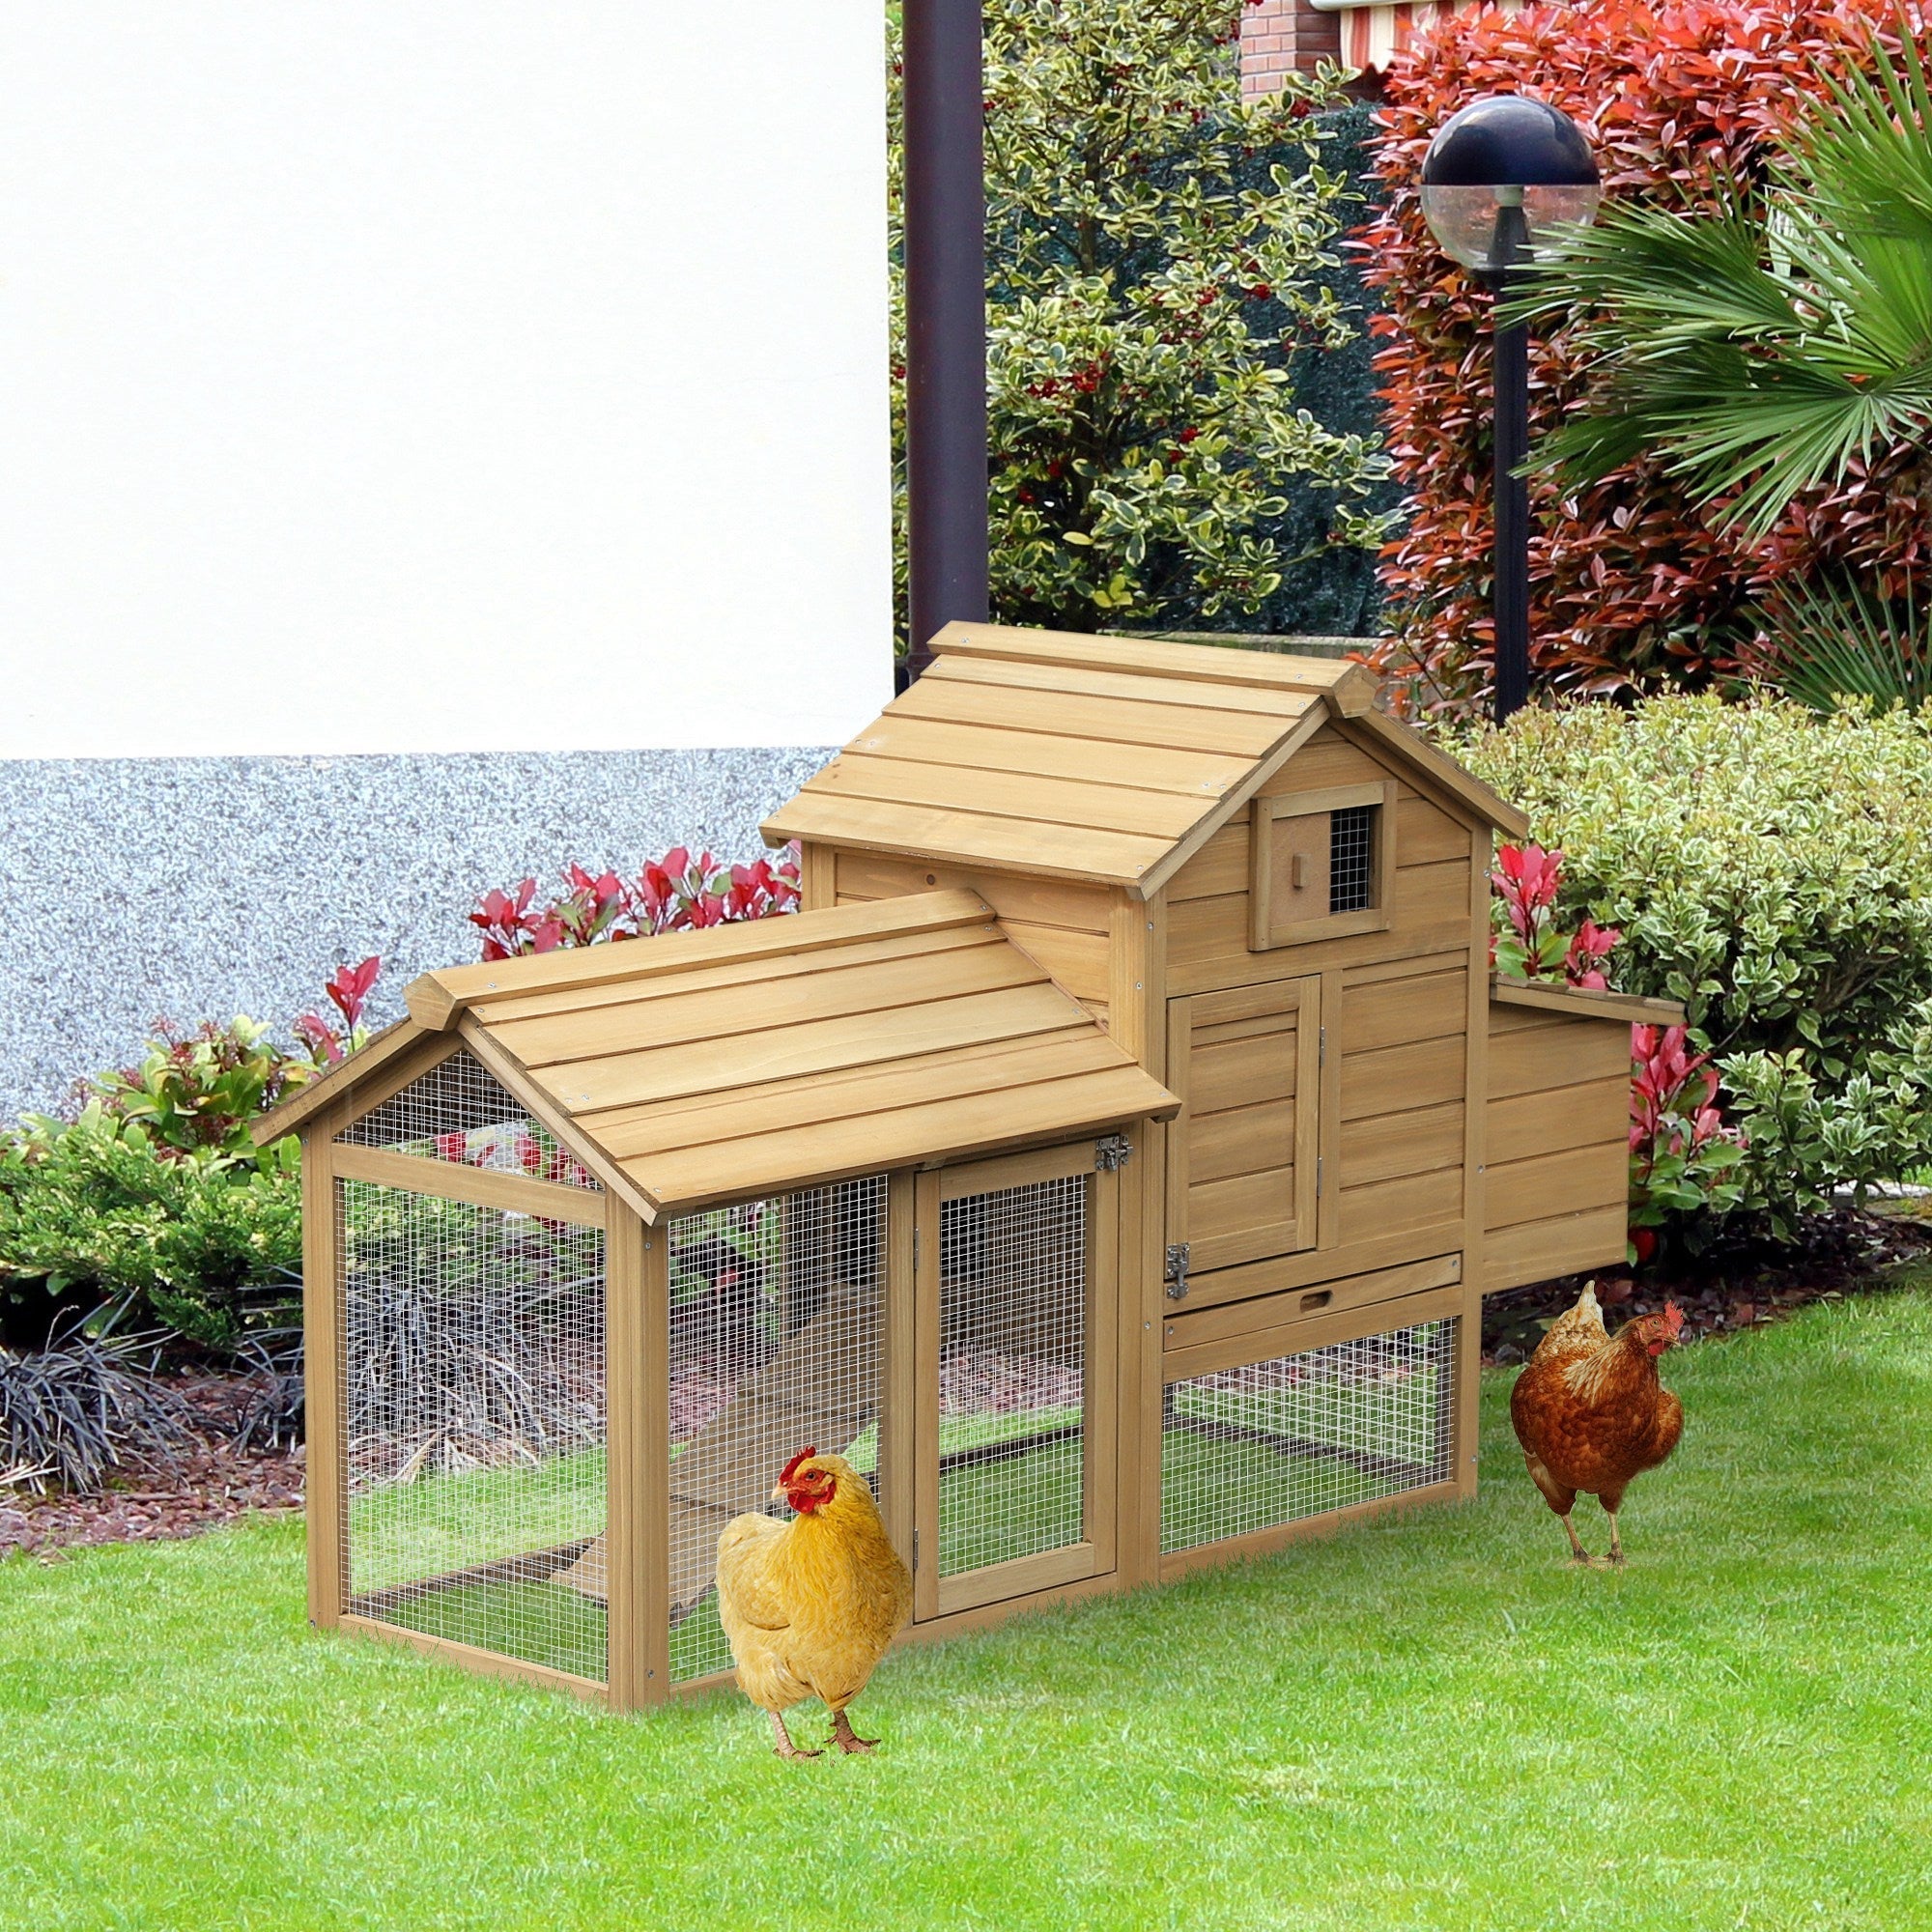 Enclosed Small Wooden Chicken Coop with Nesting Box, PawHut, Natural